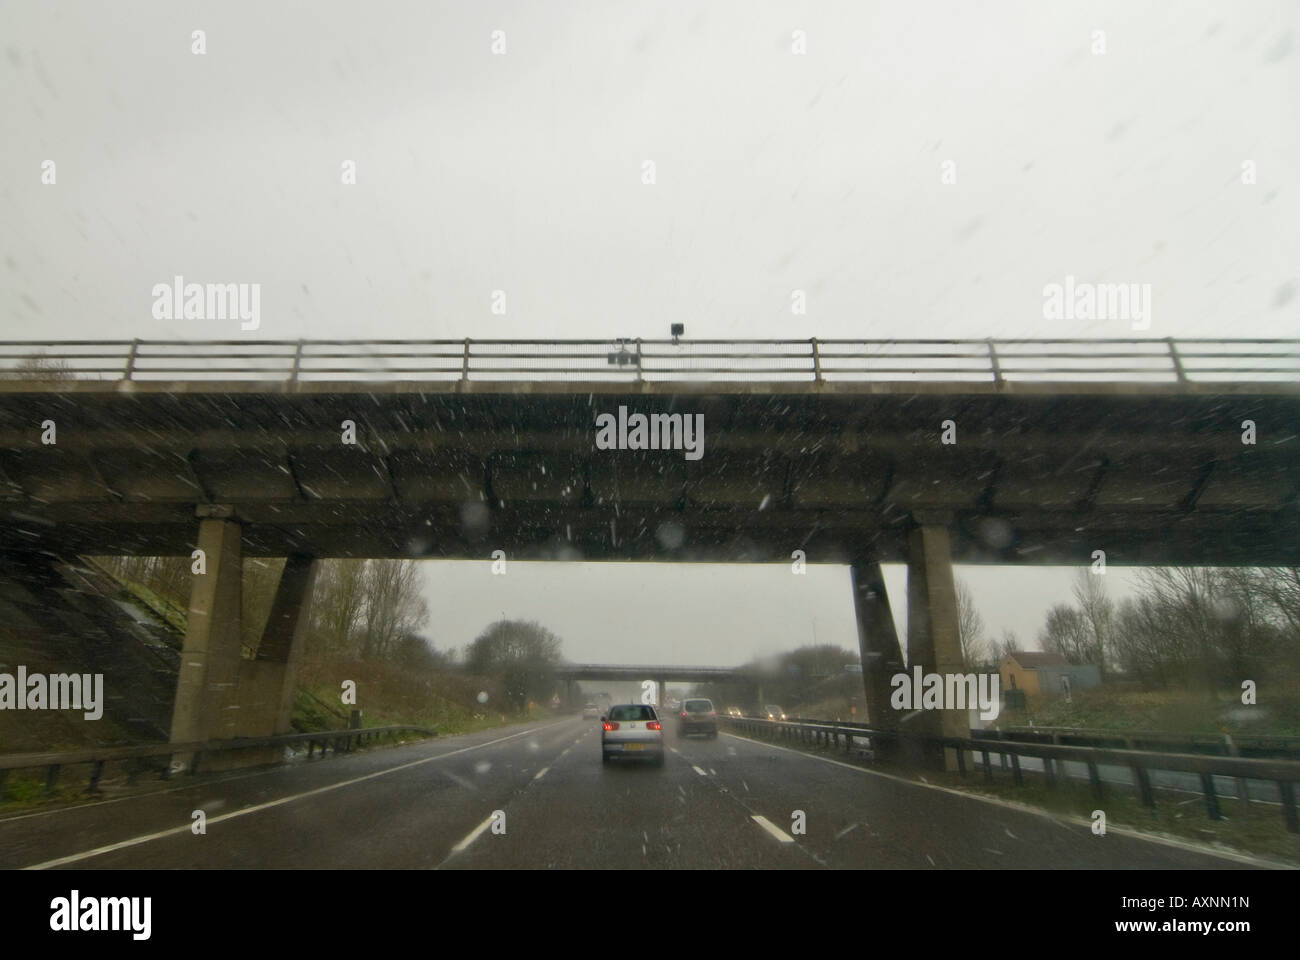 Horizontal wide angle view driving down the motorway in bad weather conditions - rain, sleet and snow. Stock Photo